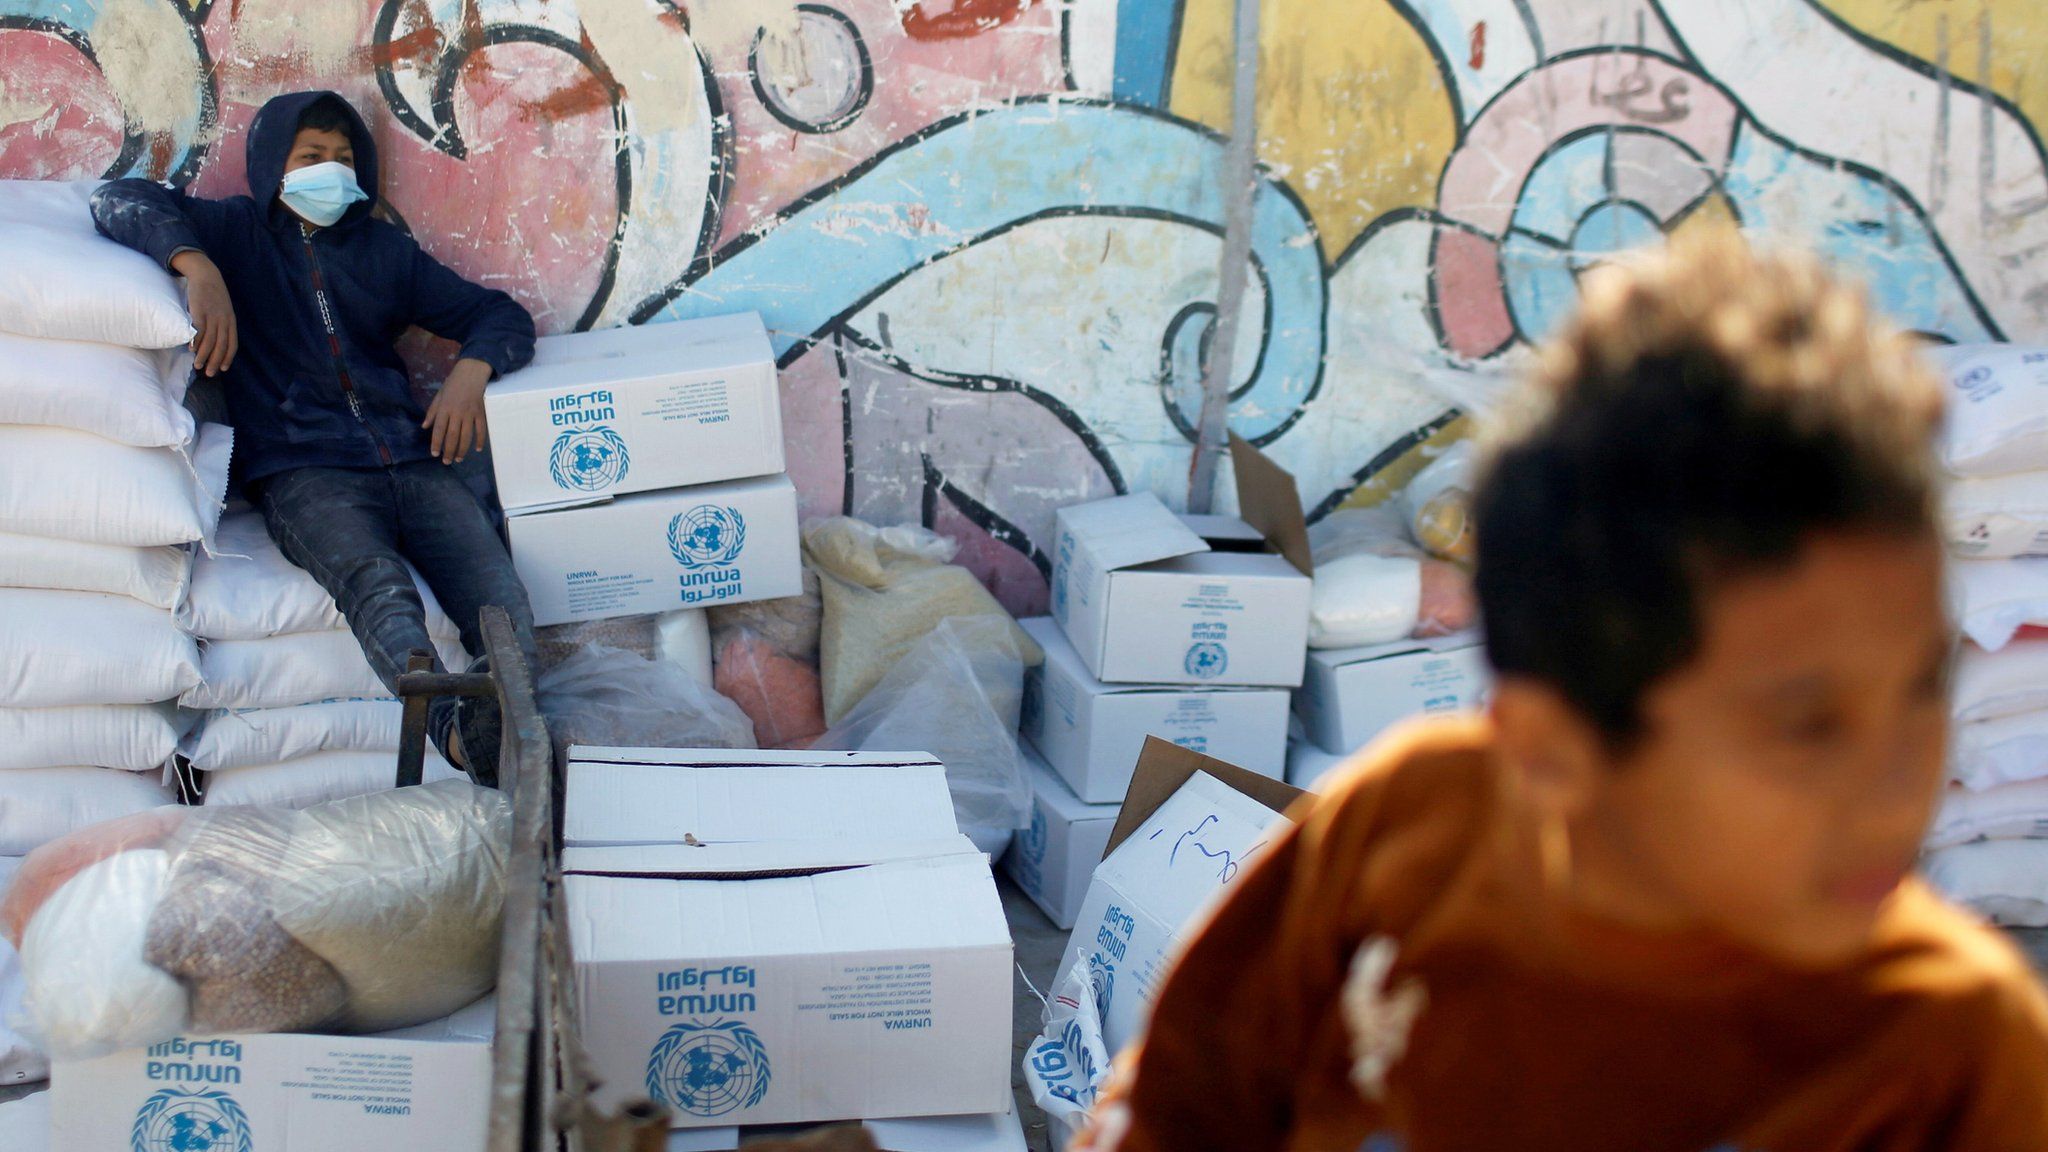 A Palestinian boy sits on a bag of flour at an aid distribution centre run by the United Nations Relief and Works Agency (Unrwa) in Gaza City (20 January 2021)